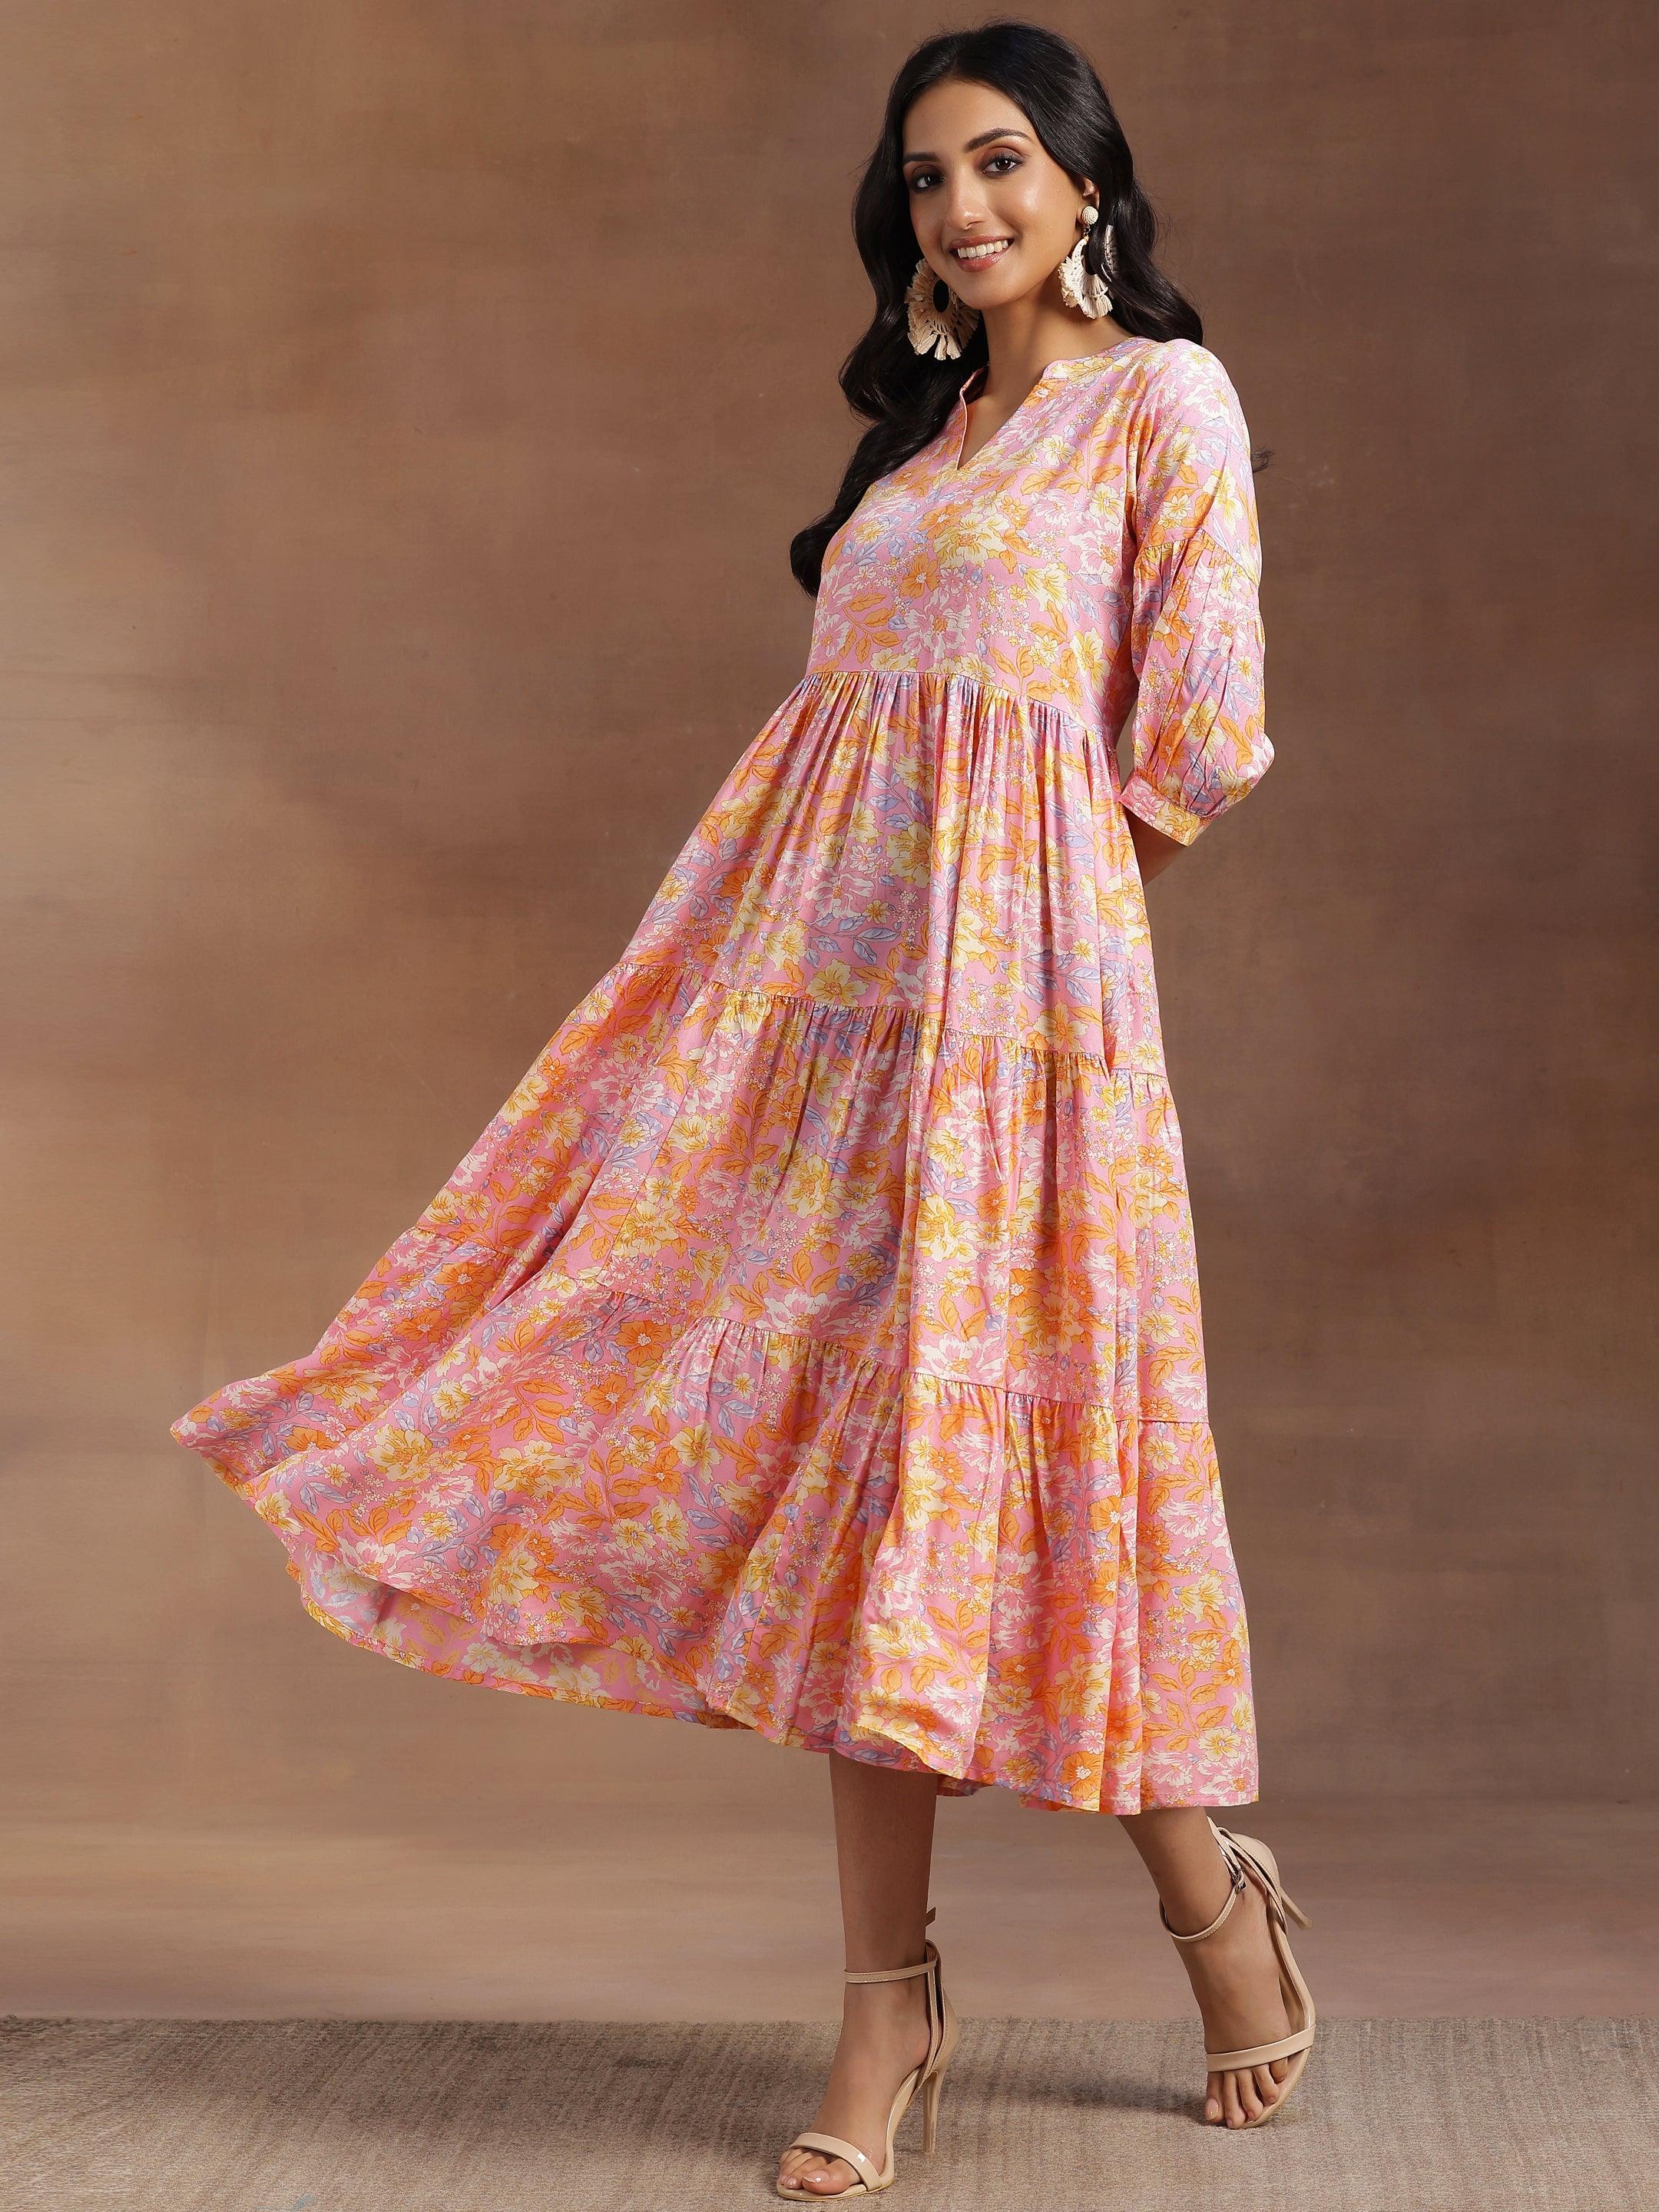 Pink Printed Rayon Fit and Flare Dress